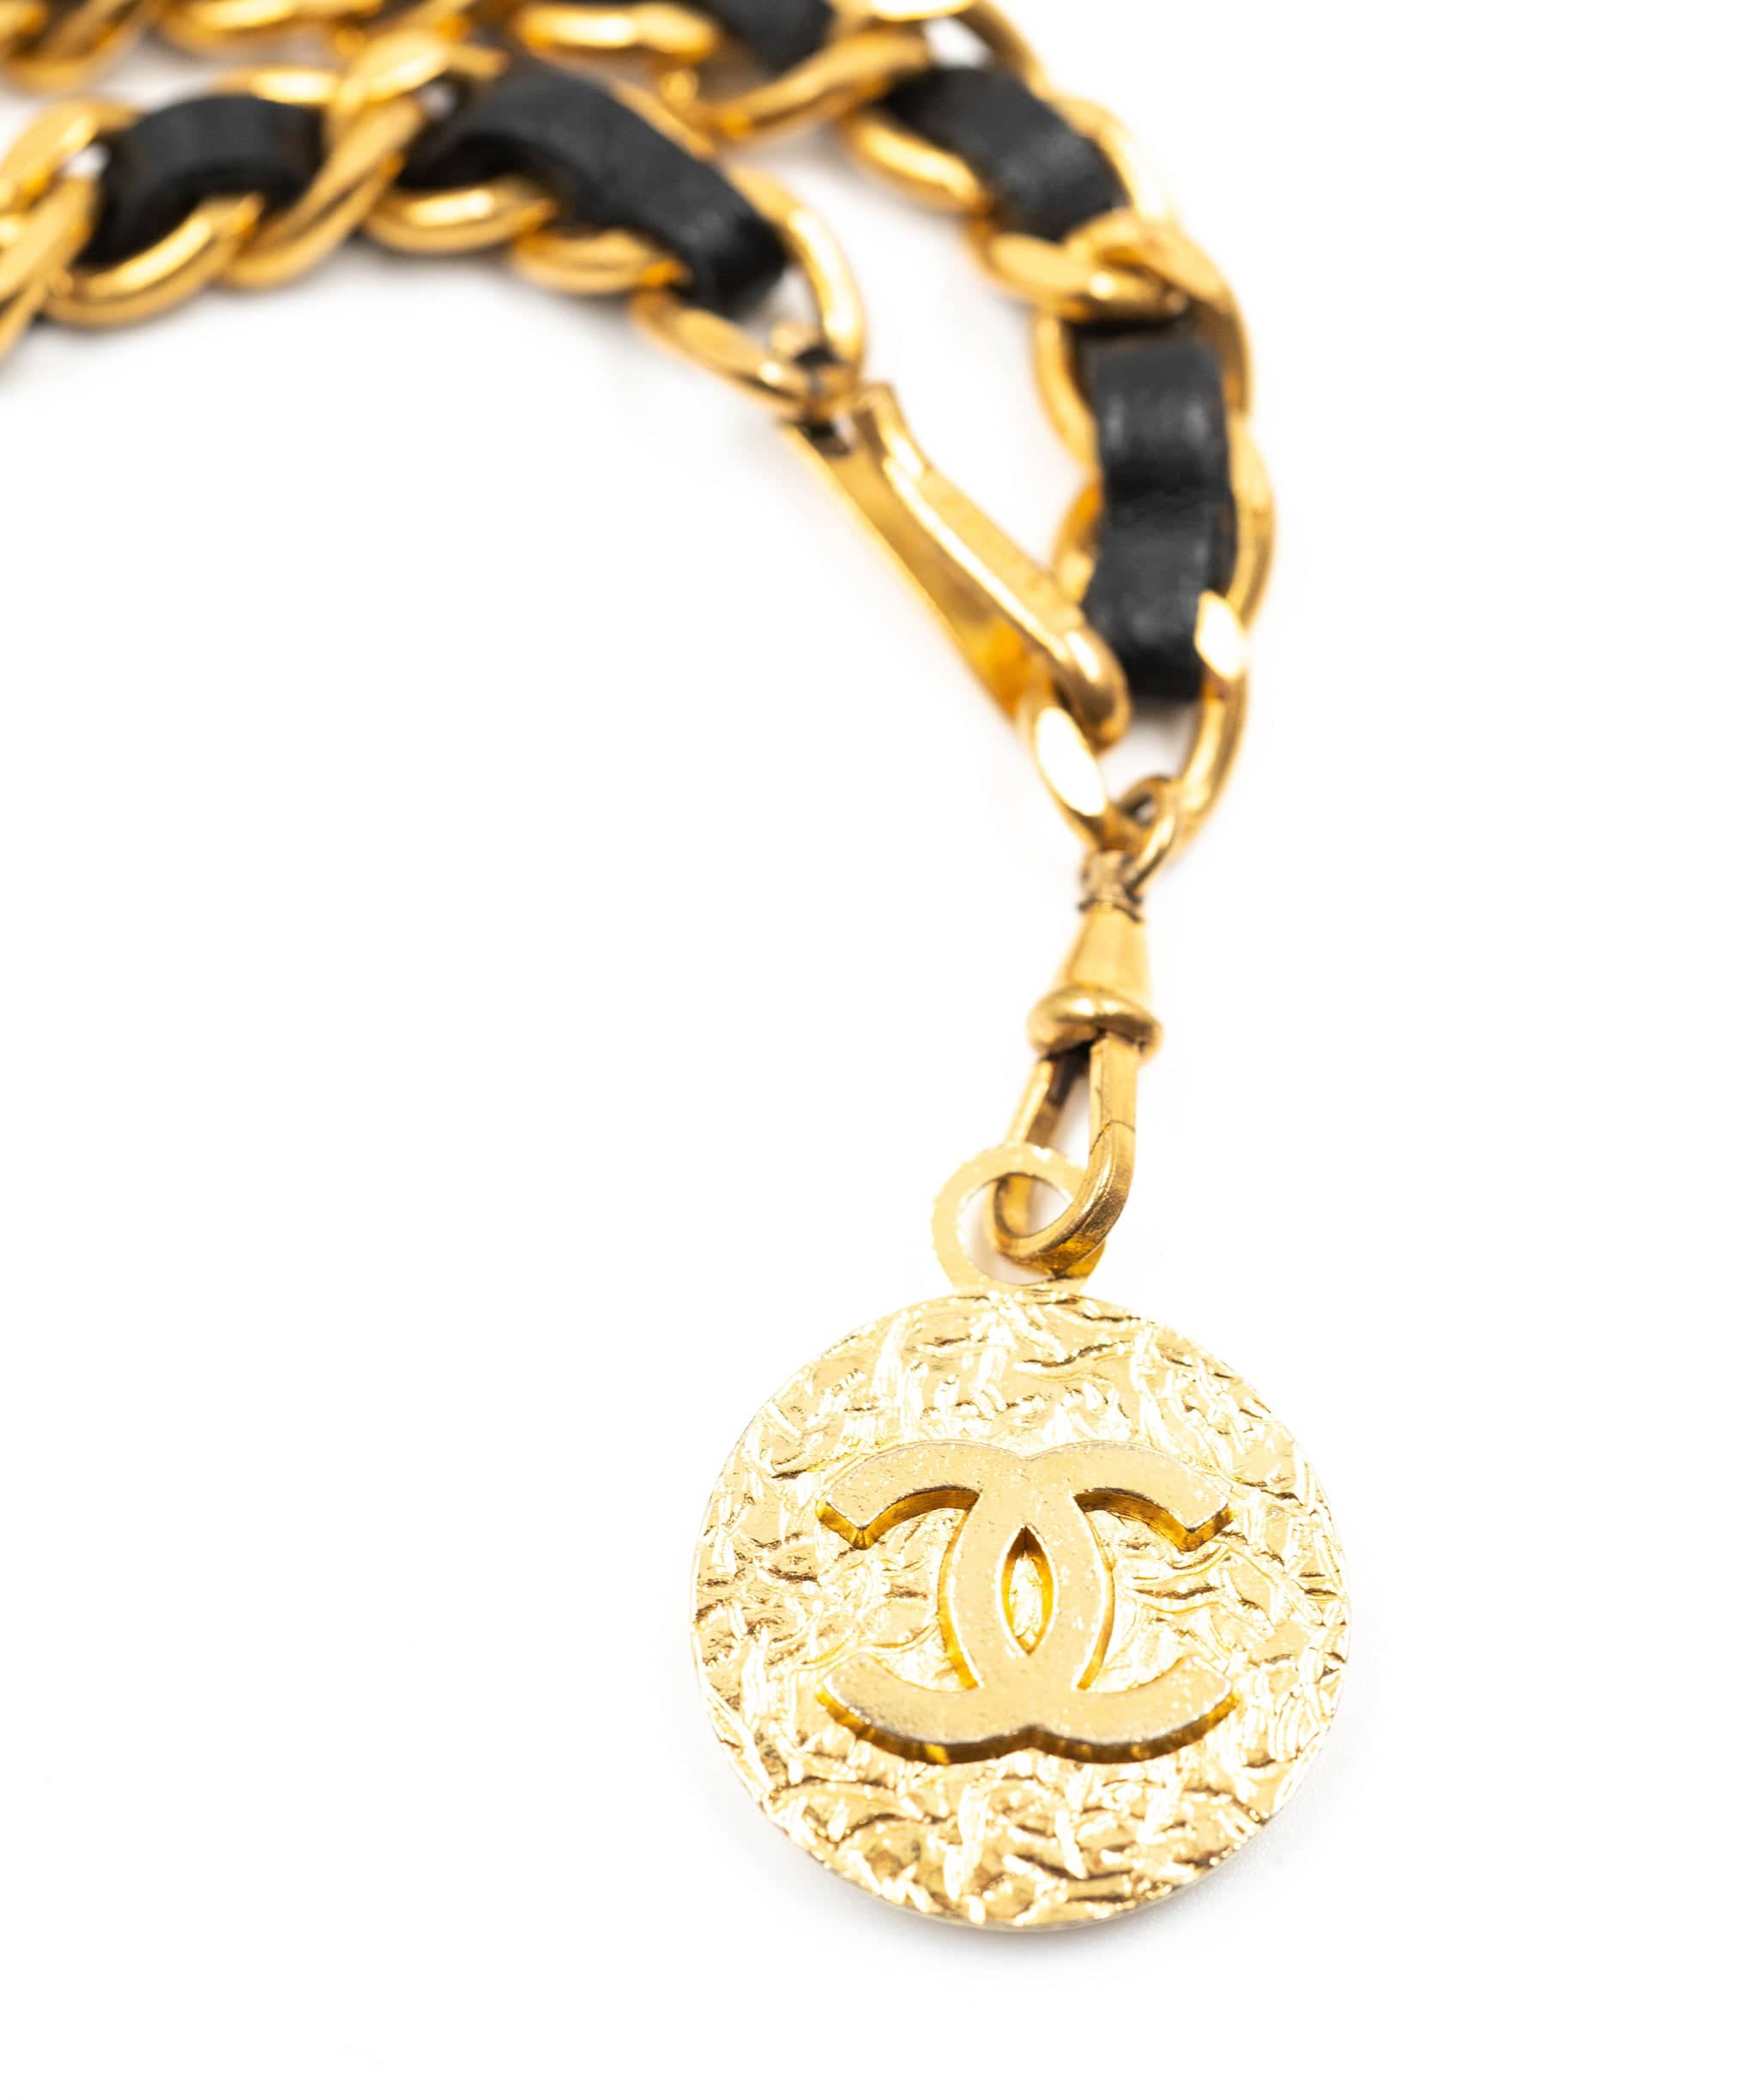 Chanel CHANEL vintage black leather & gold chain belt with CC medallion charm - AWL2222